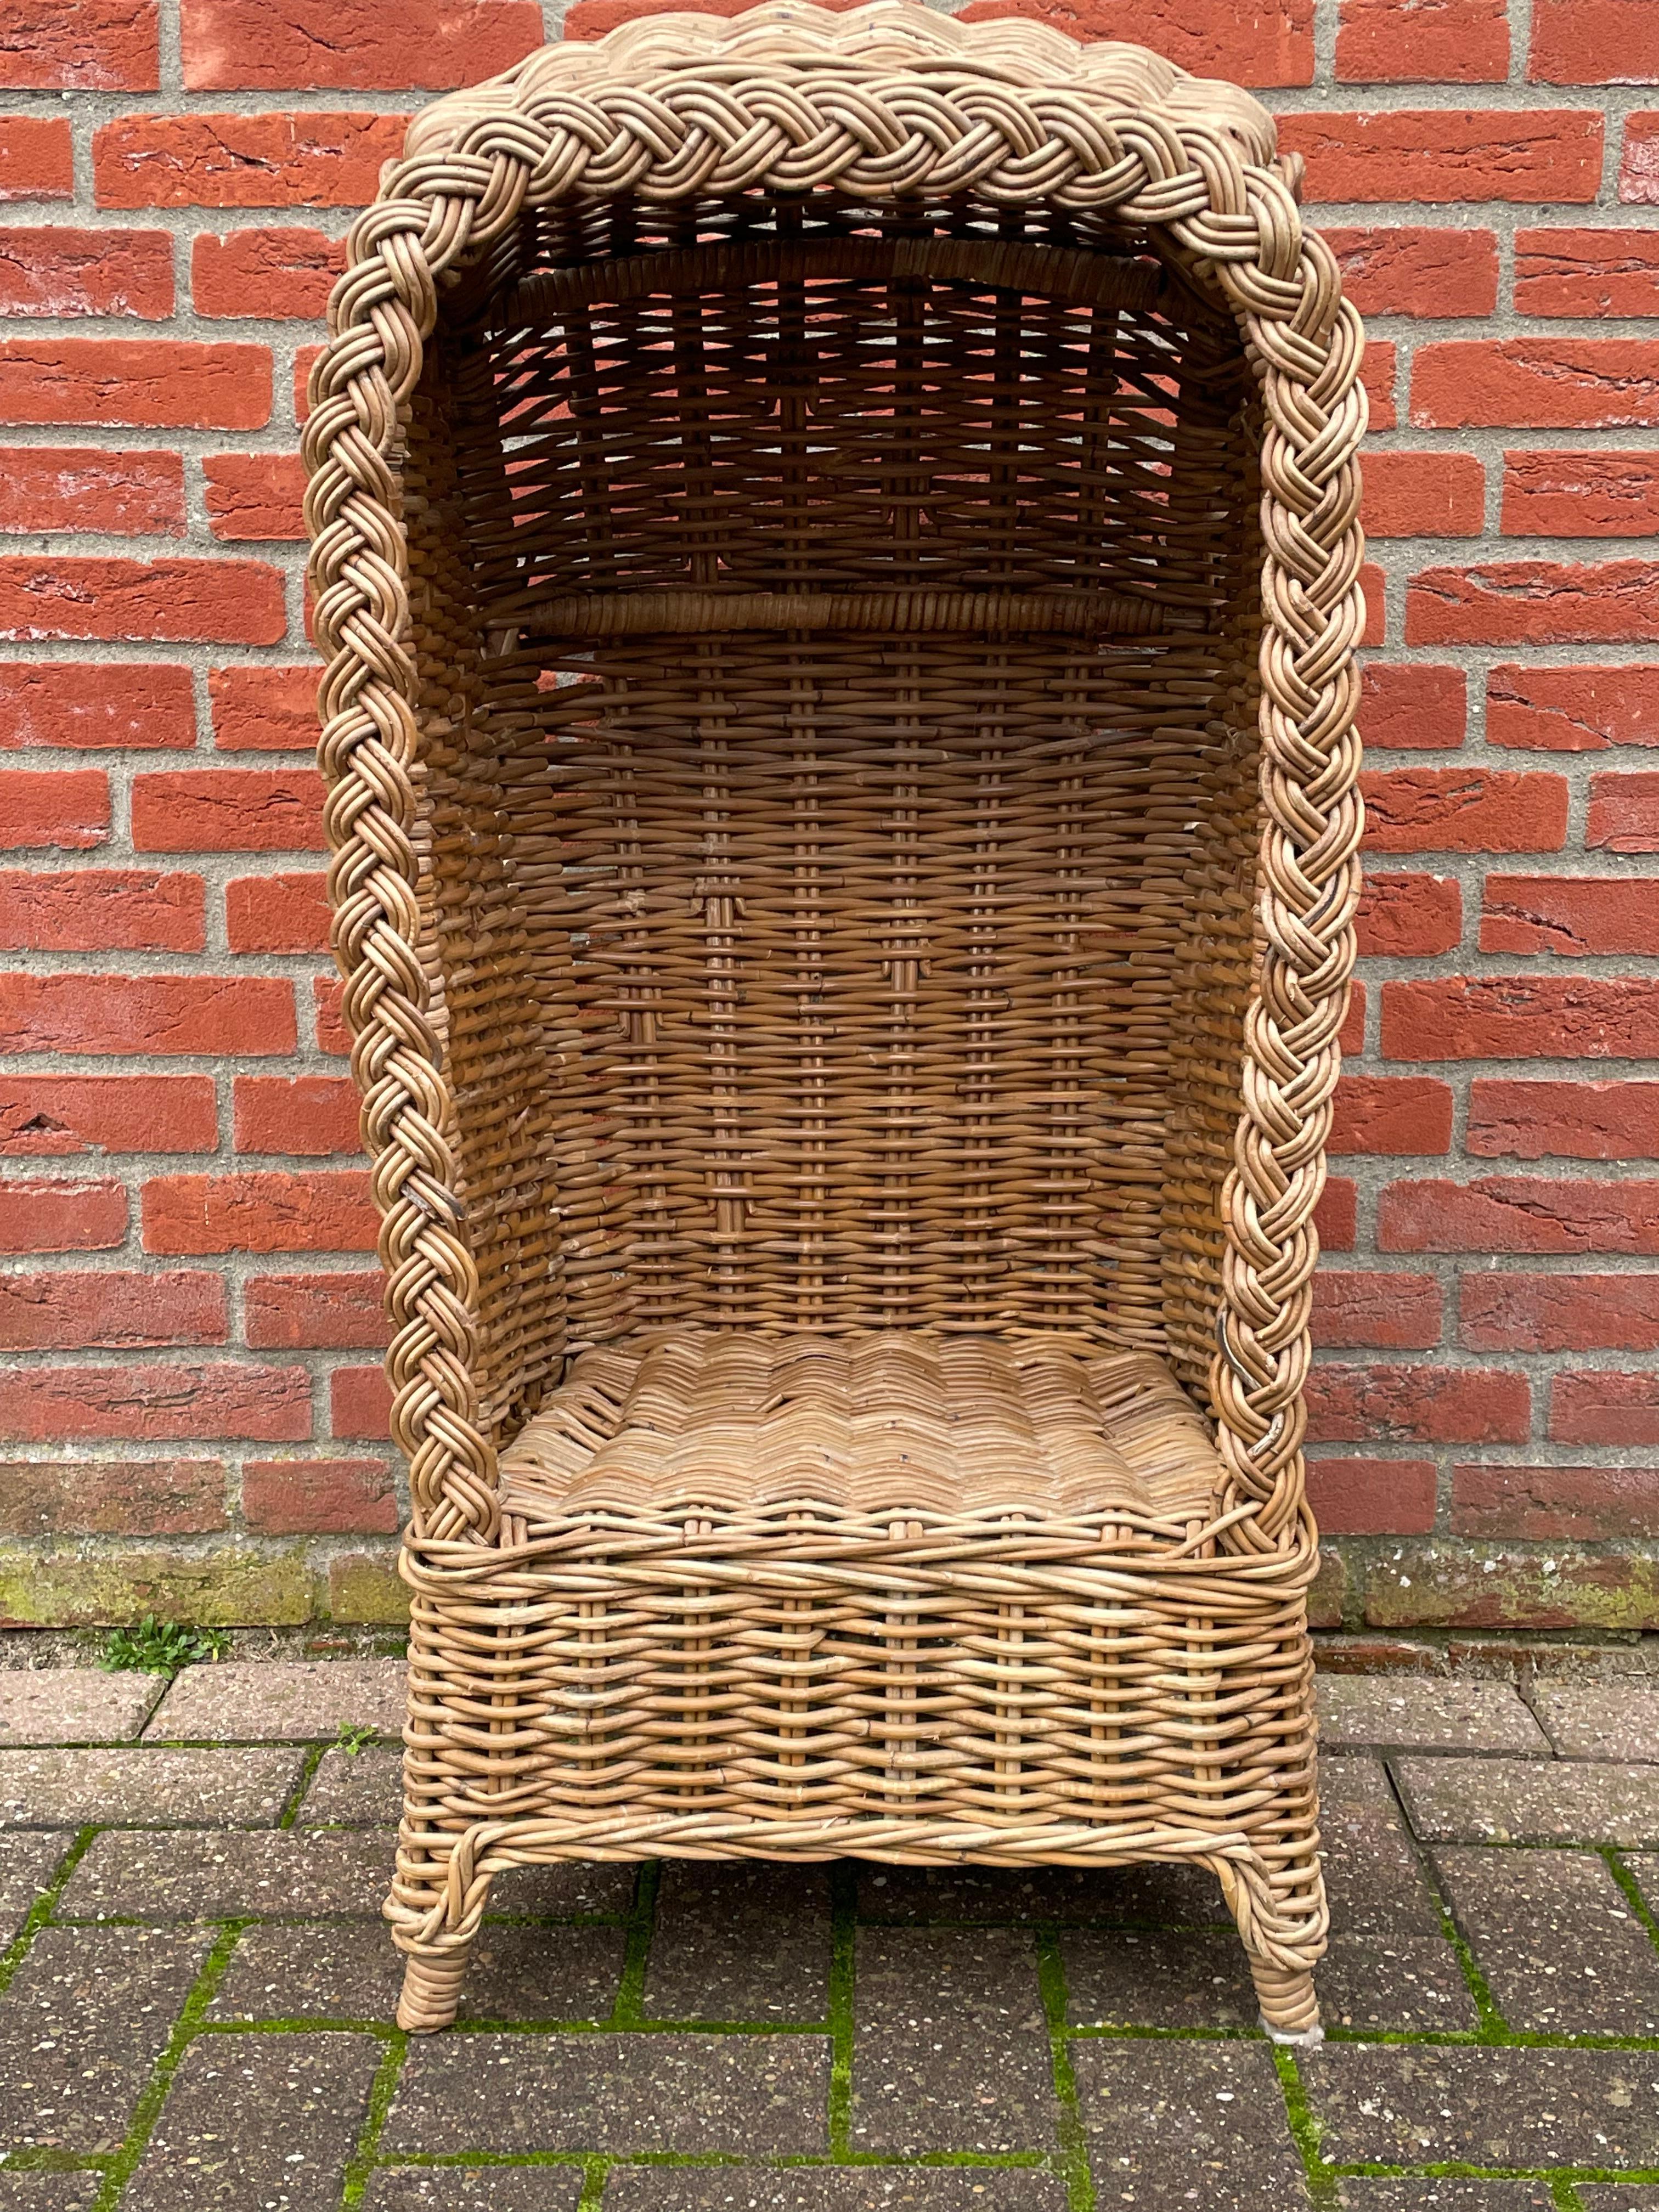 Very Rare & Super Decorative Antique-Like Hand Woven Rattan Beach Chair for Kids For Sale 5